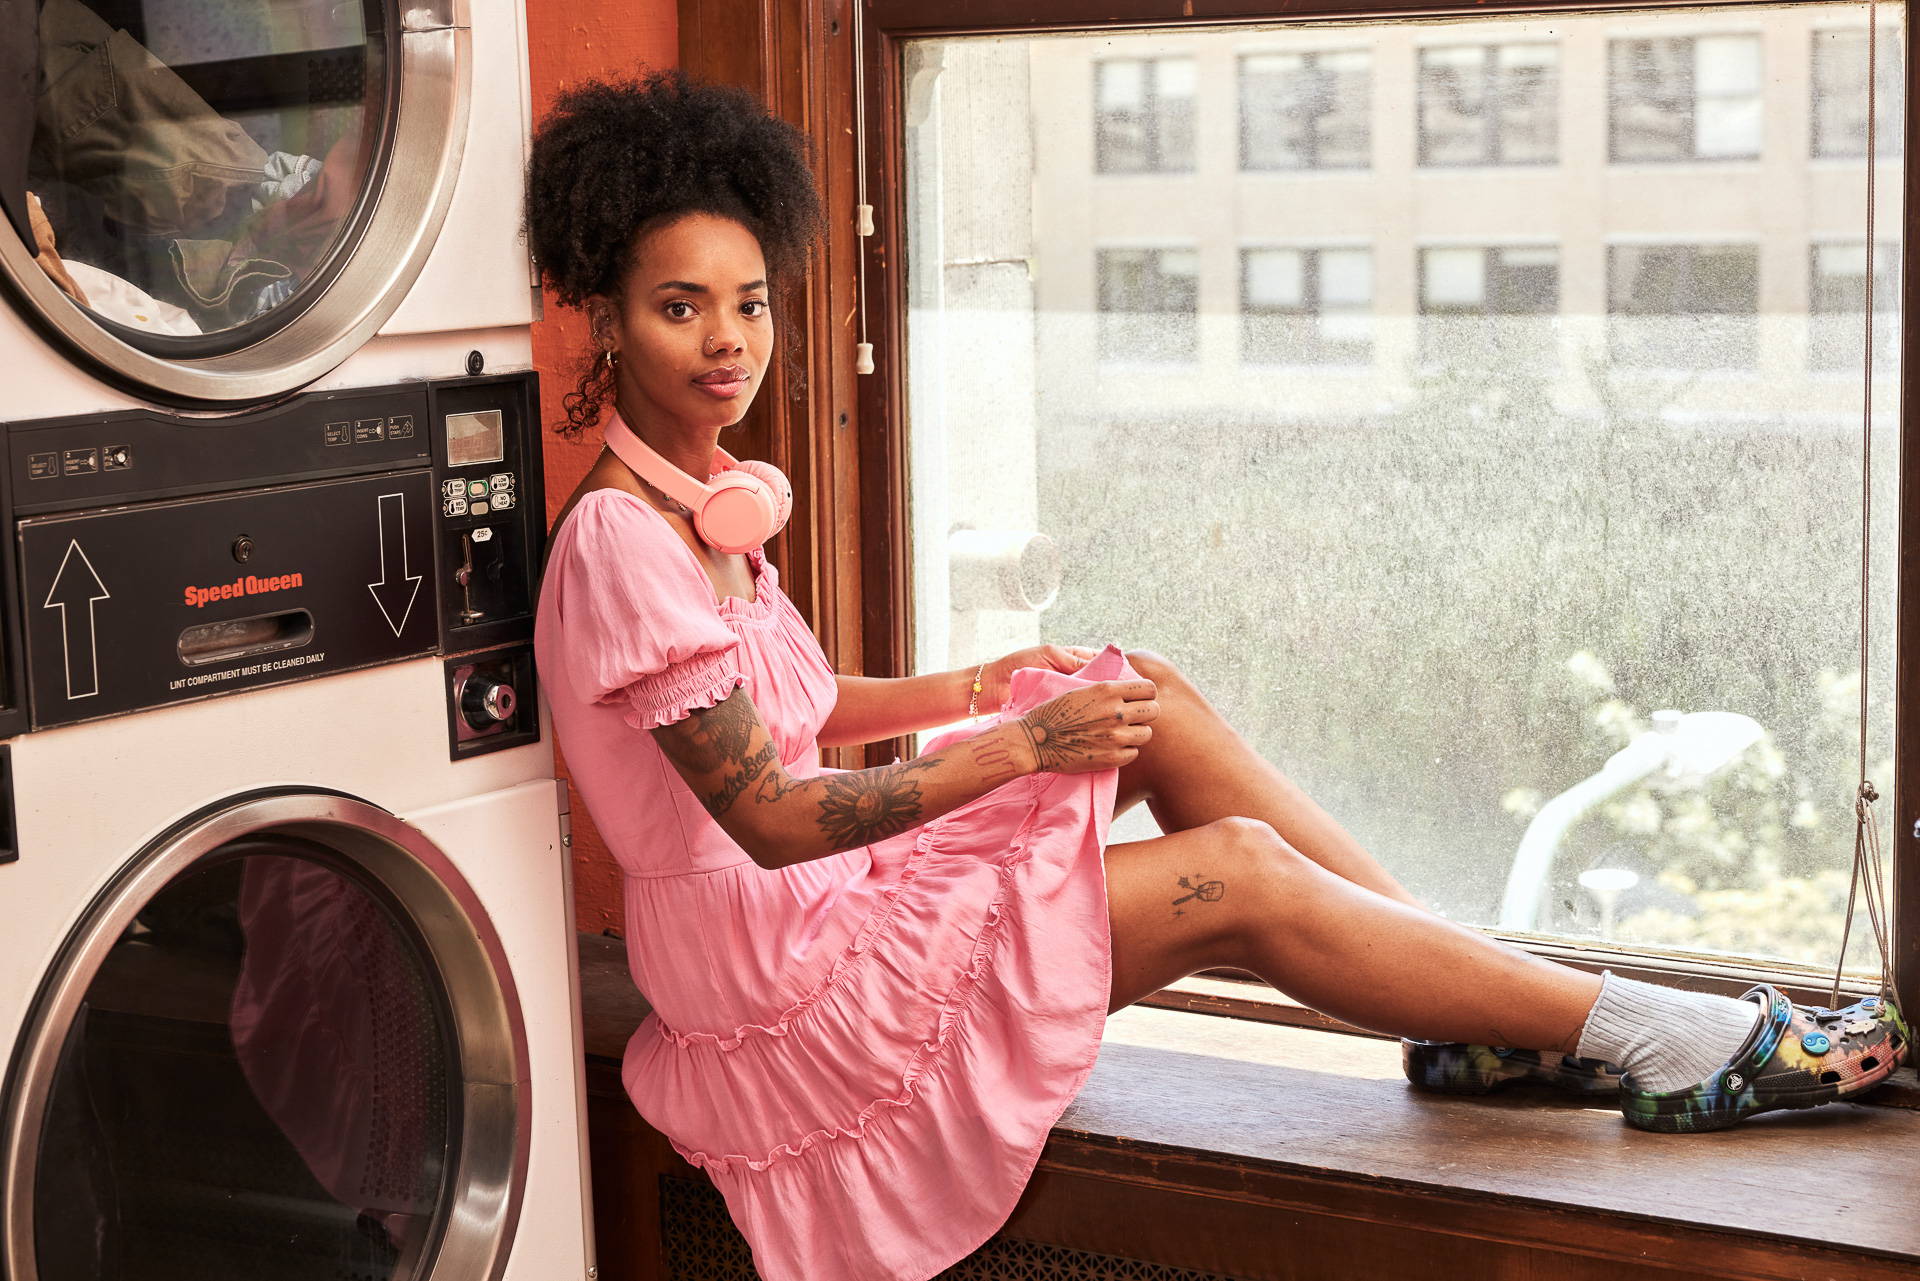 Trixxi Back to school embracing dorm life doing laundry and reading in a barbie pink tier dress.